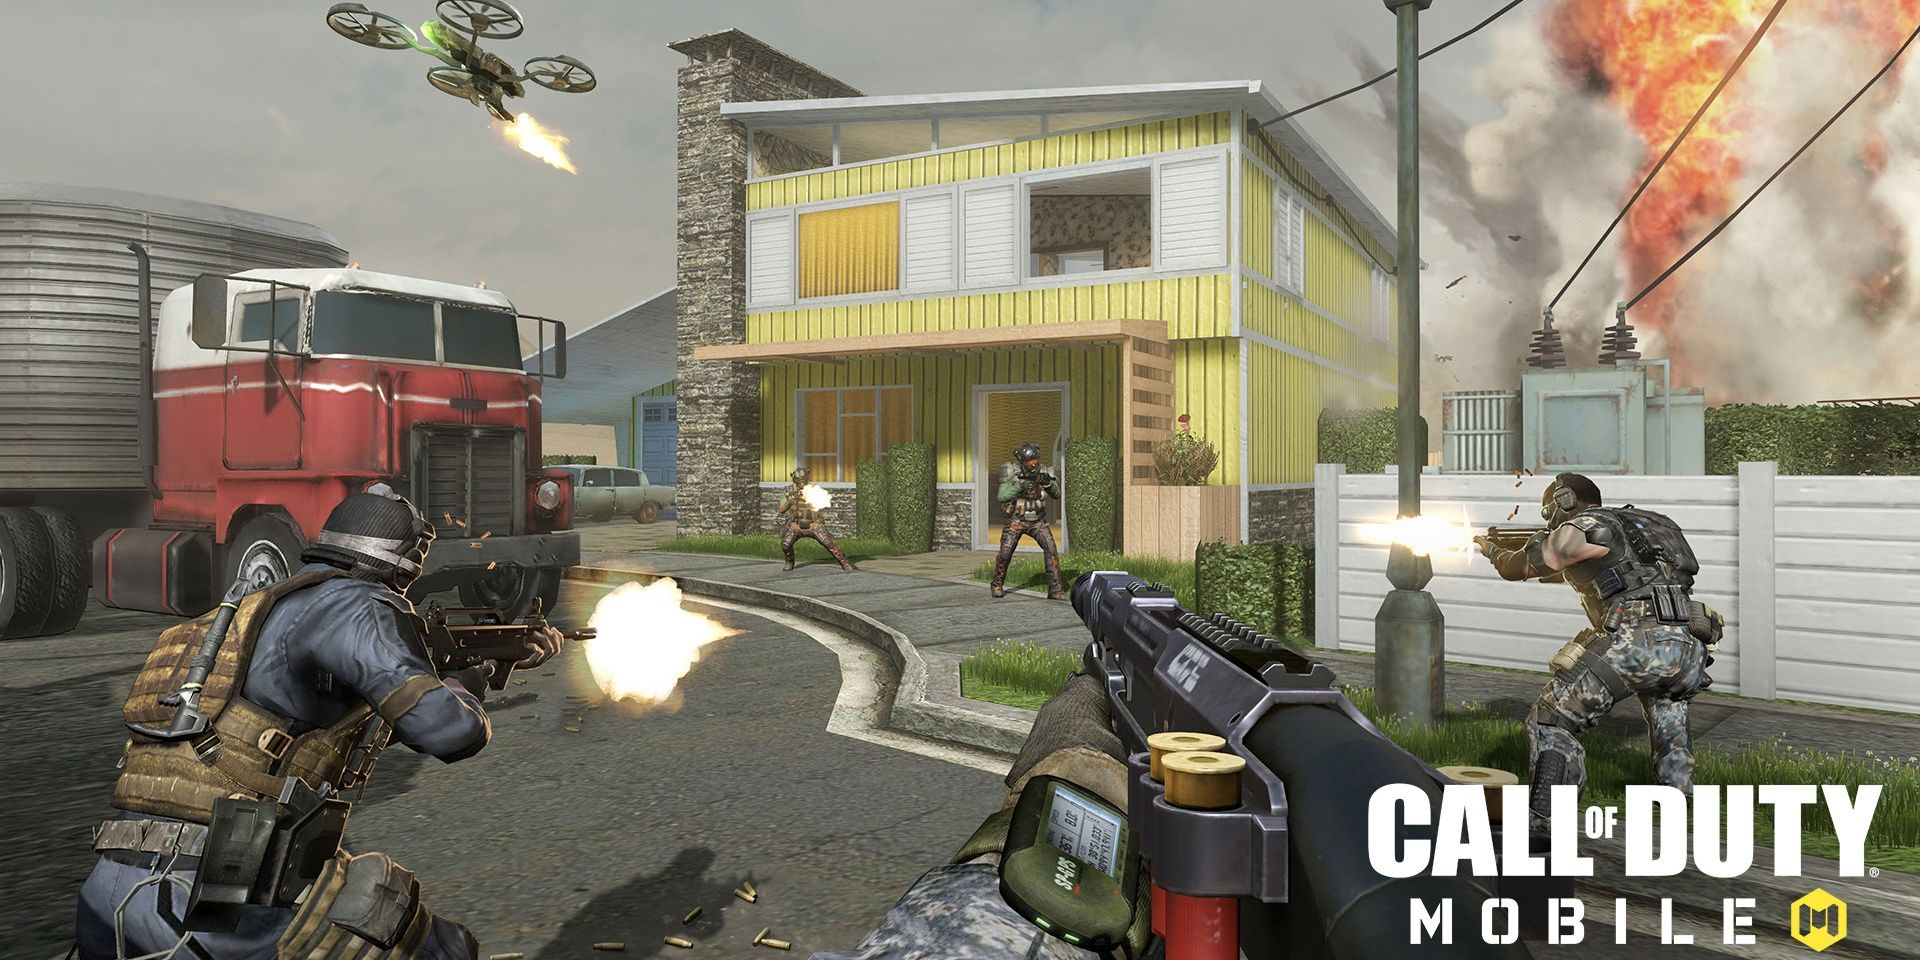 Gameplay from COD Mobile on Android